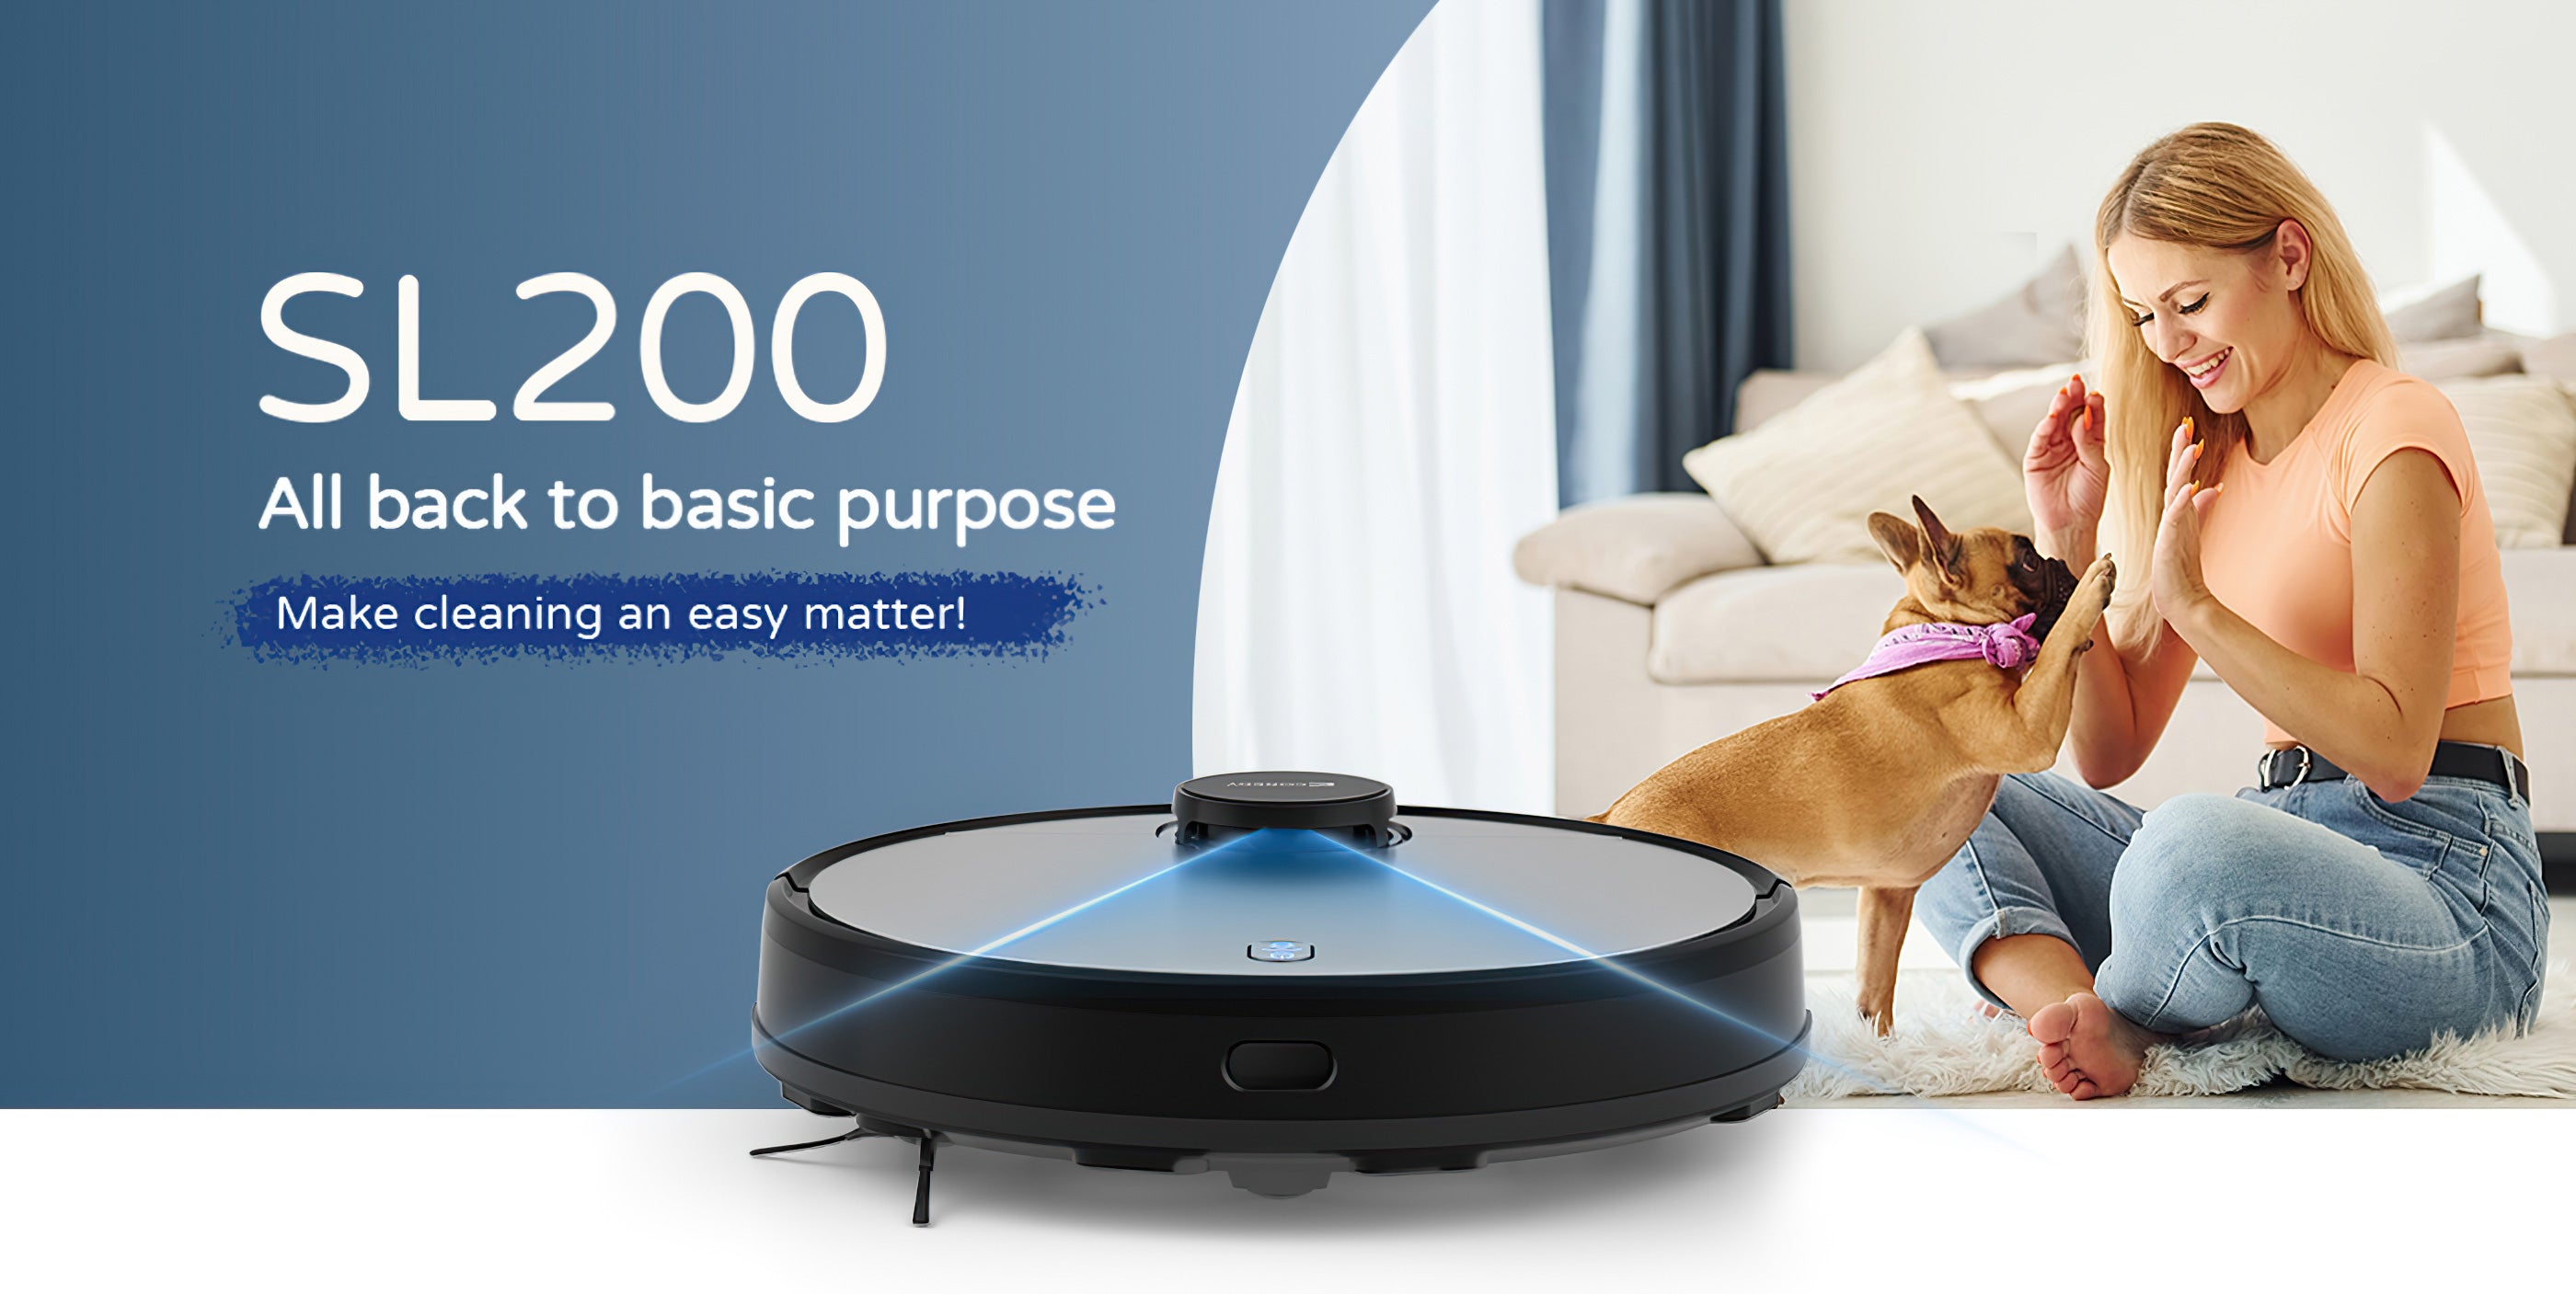 Coredy SL200 Robot Vacuum Smart Combo, Navigation and – Mop R with Laser